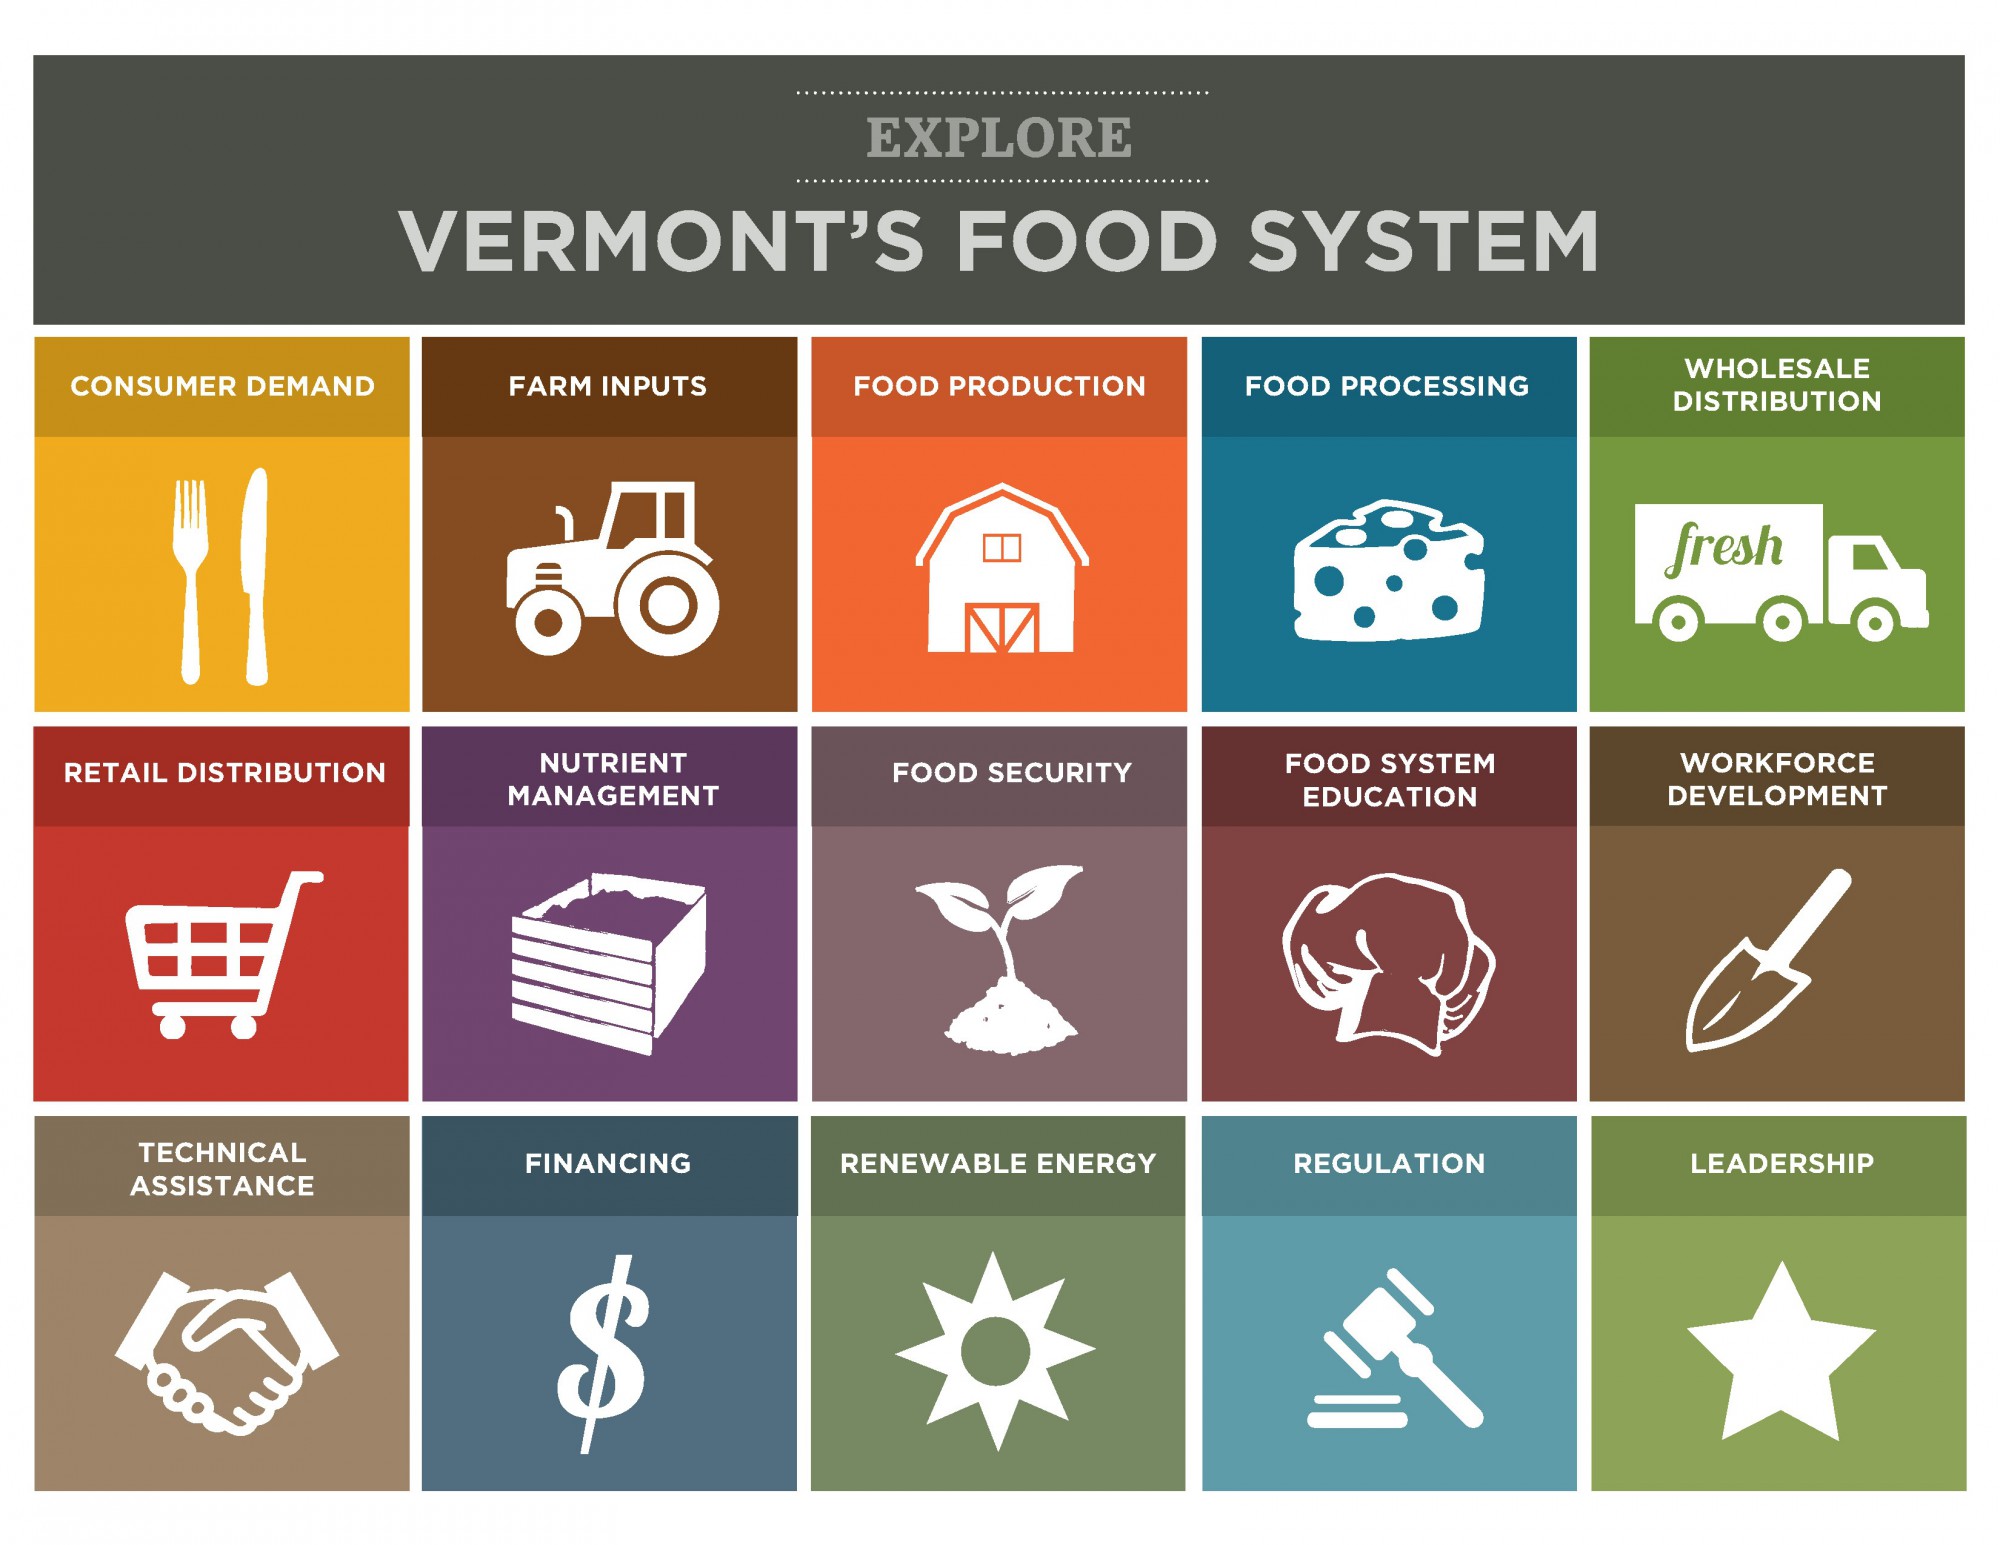 Vermont Farm to Plate Food System goals